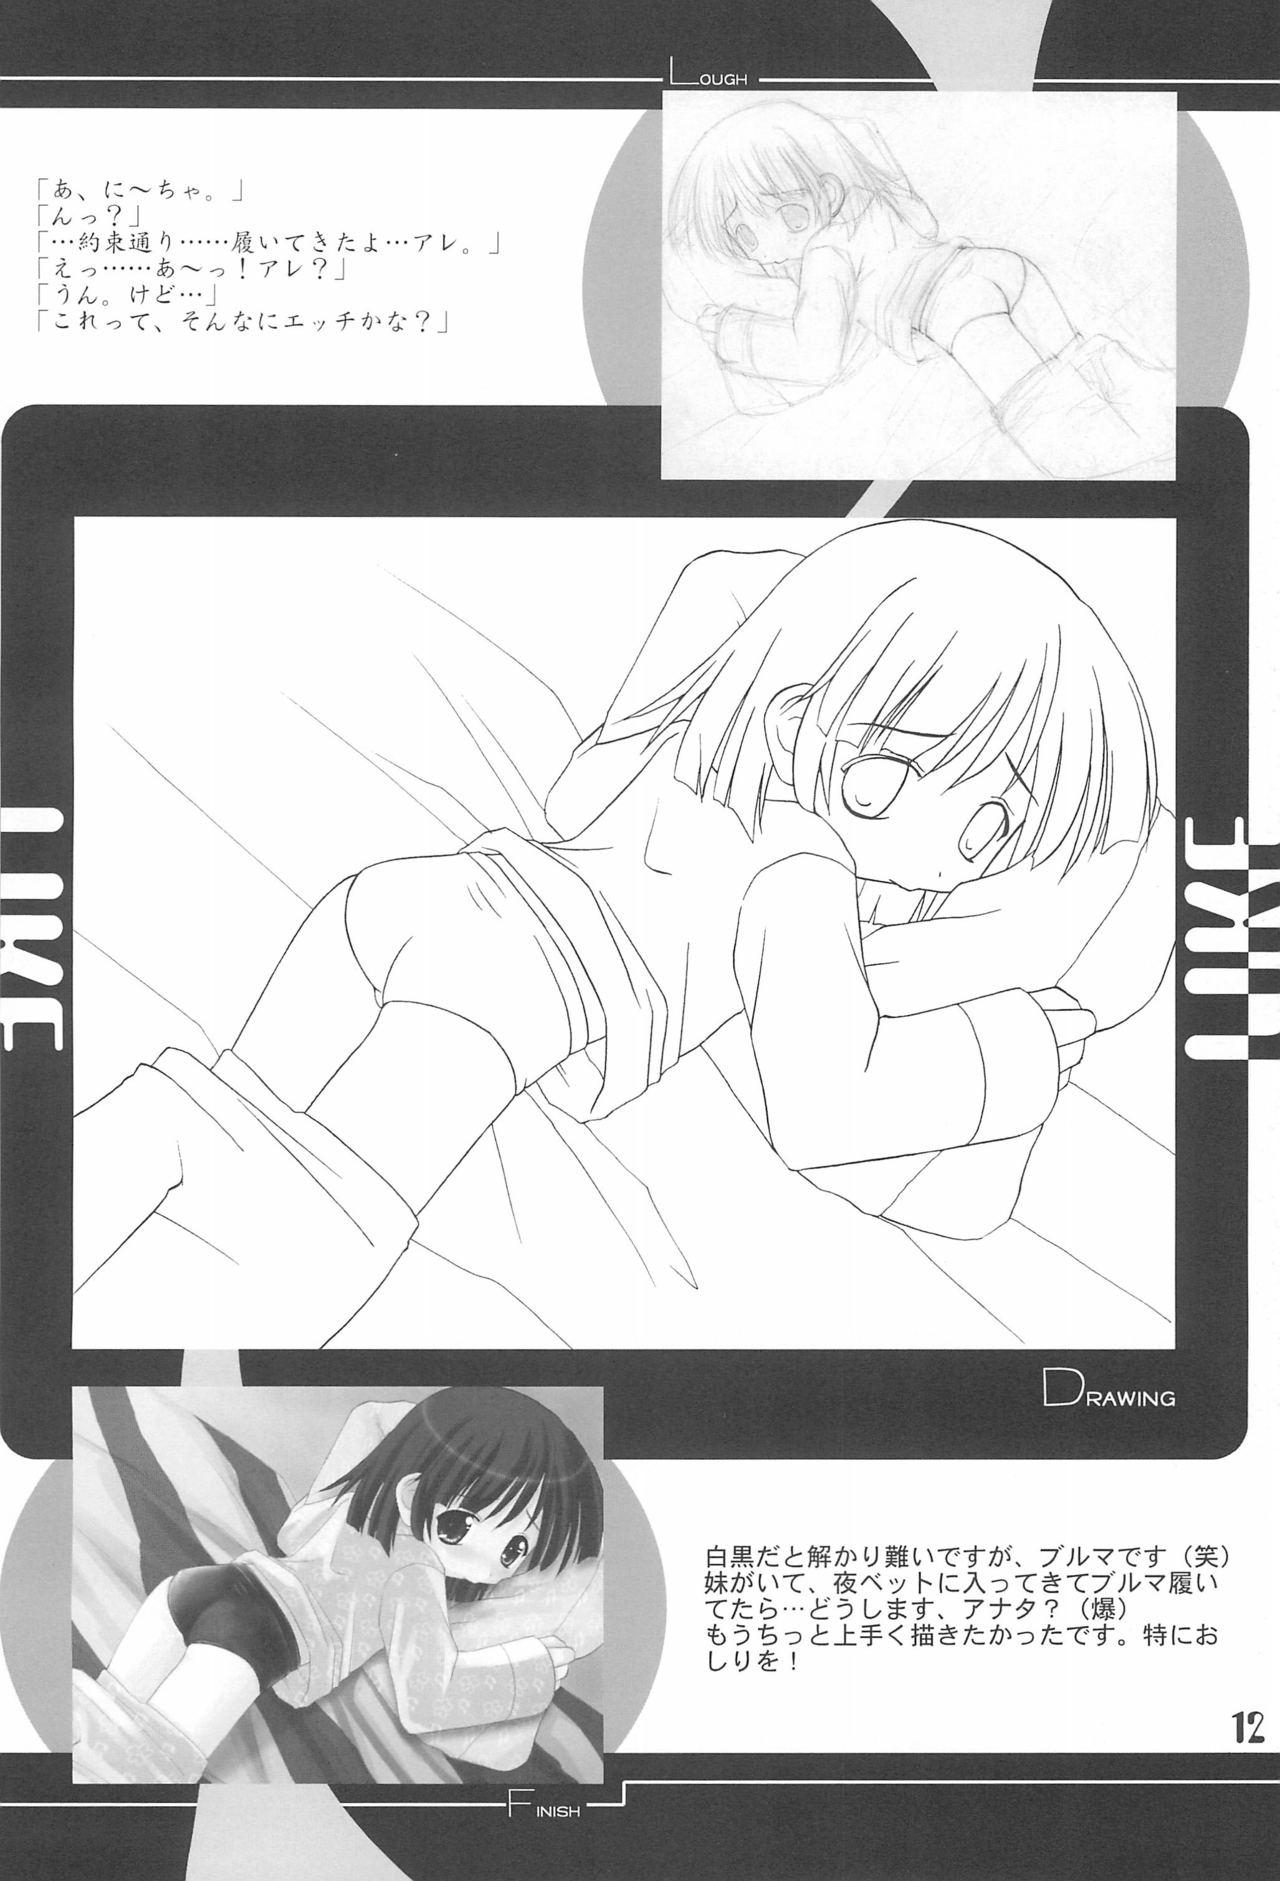 Escort (C59) [Oden-ya (Misooden)] LIKE 1-2-3+ Imouto - Original Jacking - Page 12